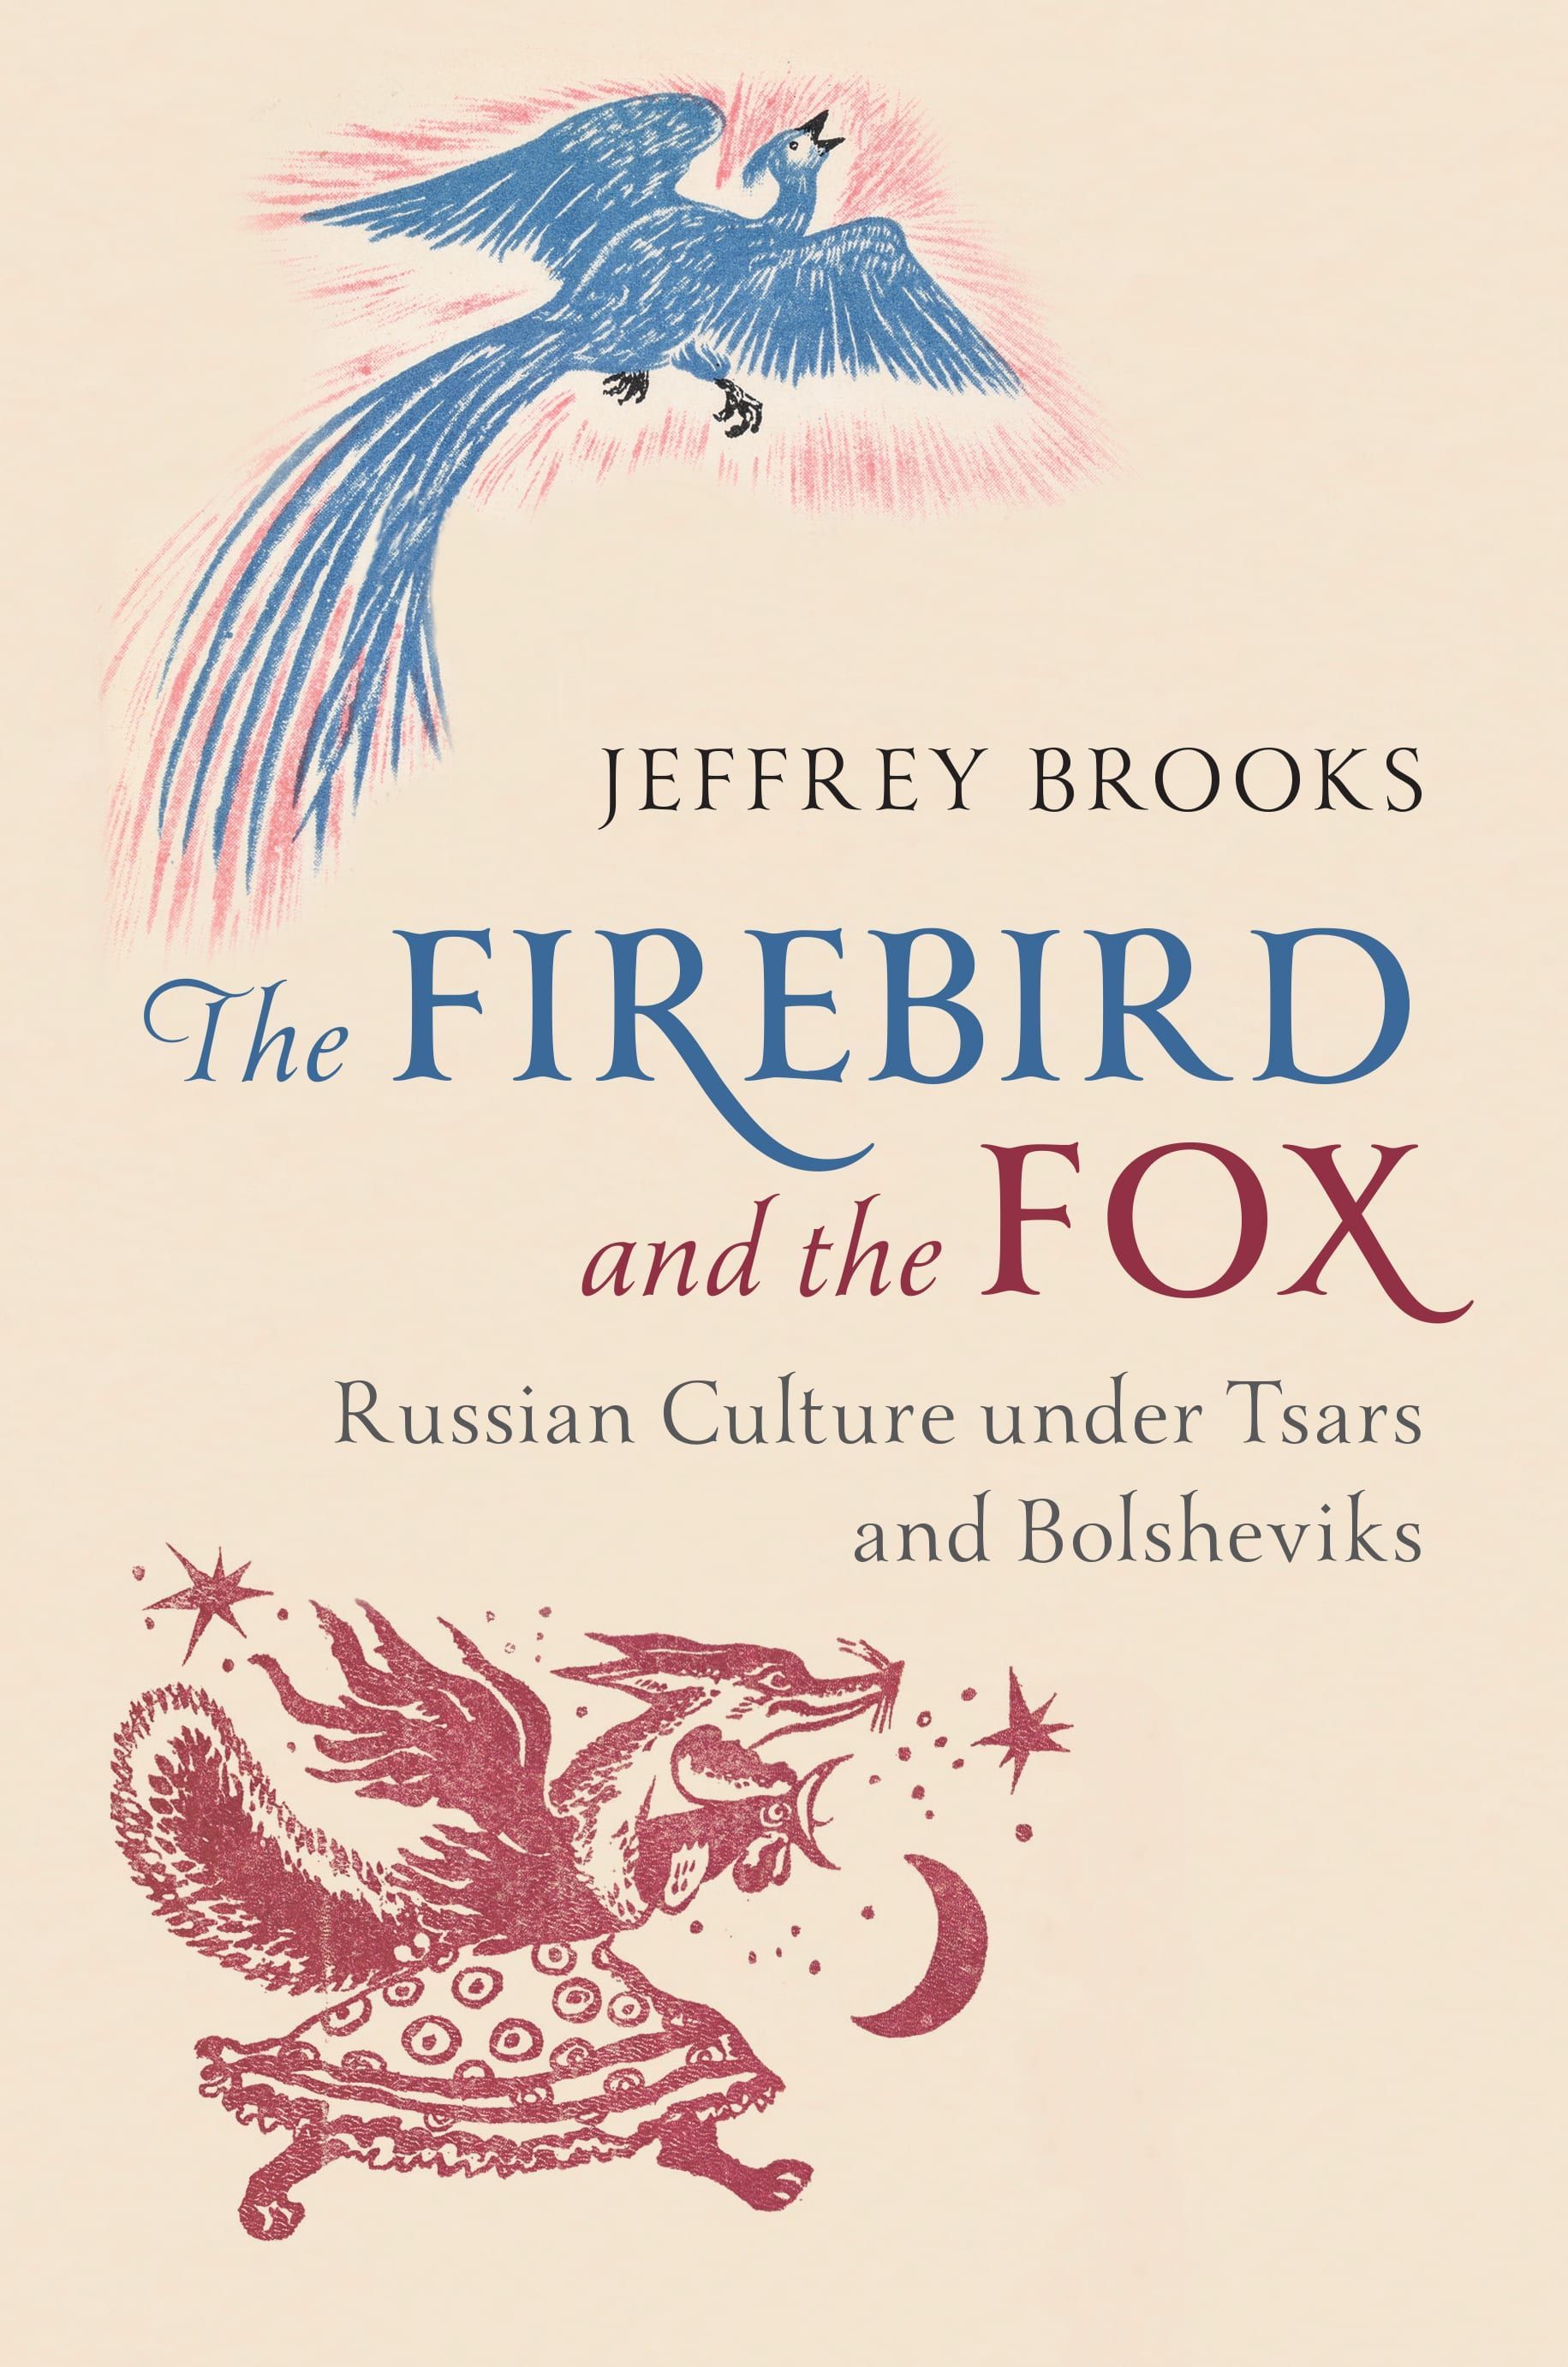 A Hope Machine: On Jeffrey Brooks’s “The Firebird and the Fox: Russian Culture under Tsars and Bolsheviks”